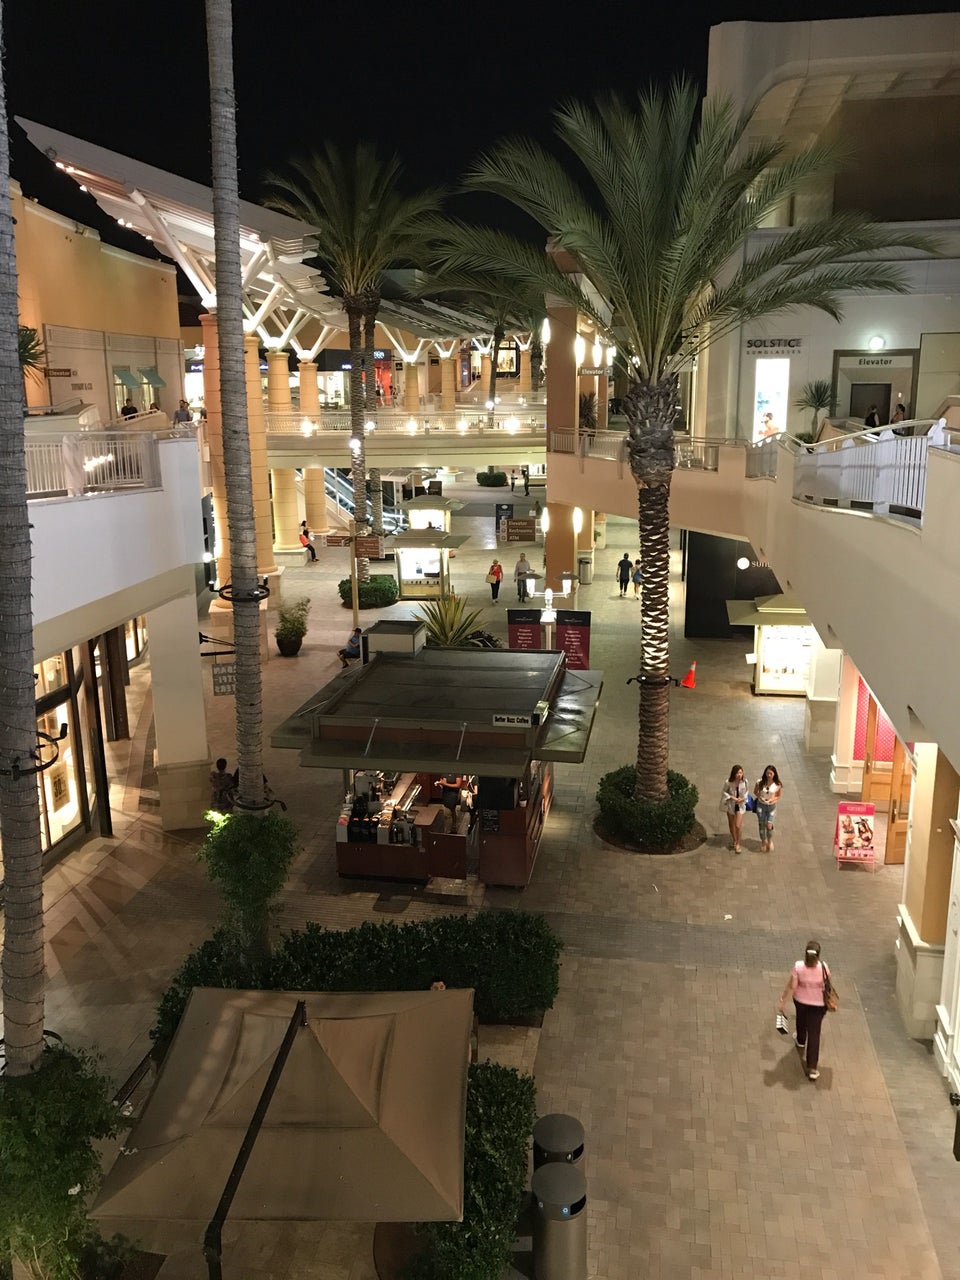 About Fashion Valley - A Shopping Center in San Diego, CA - A